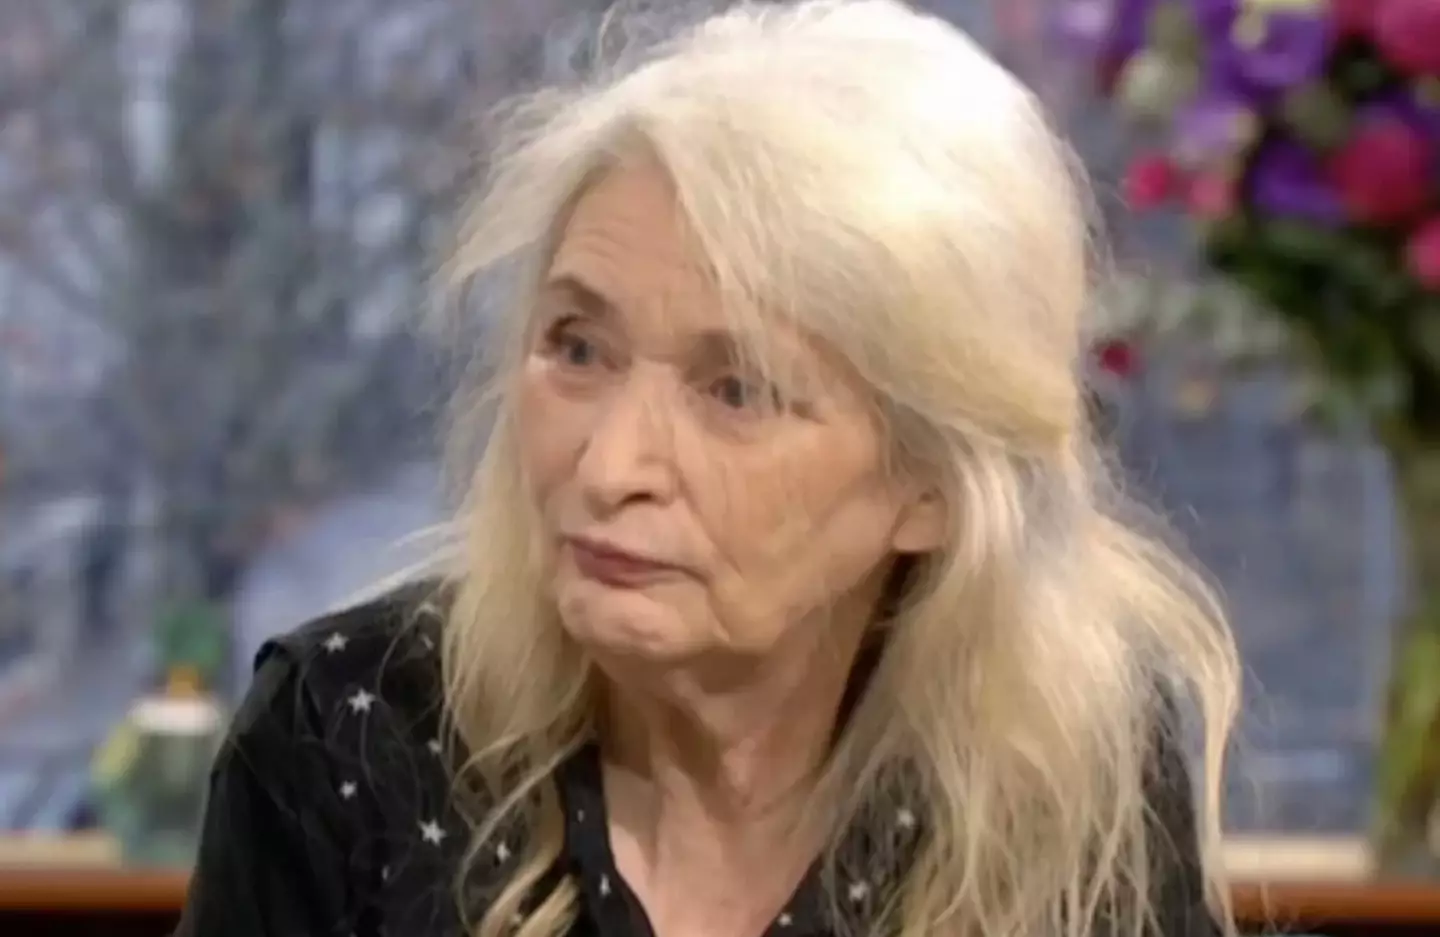 Judith Kilshaw previously made an appearance on ITV's This Morning. (ITV)